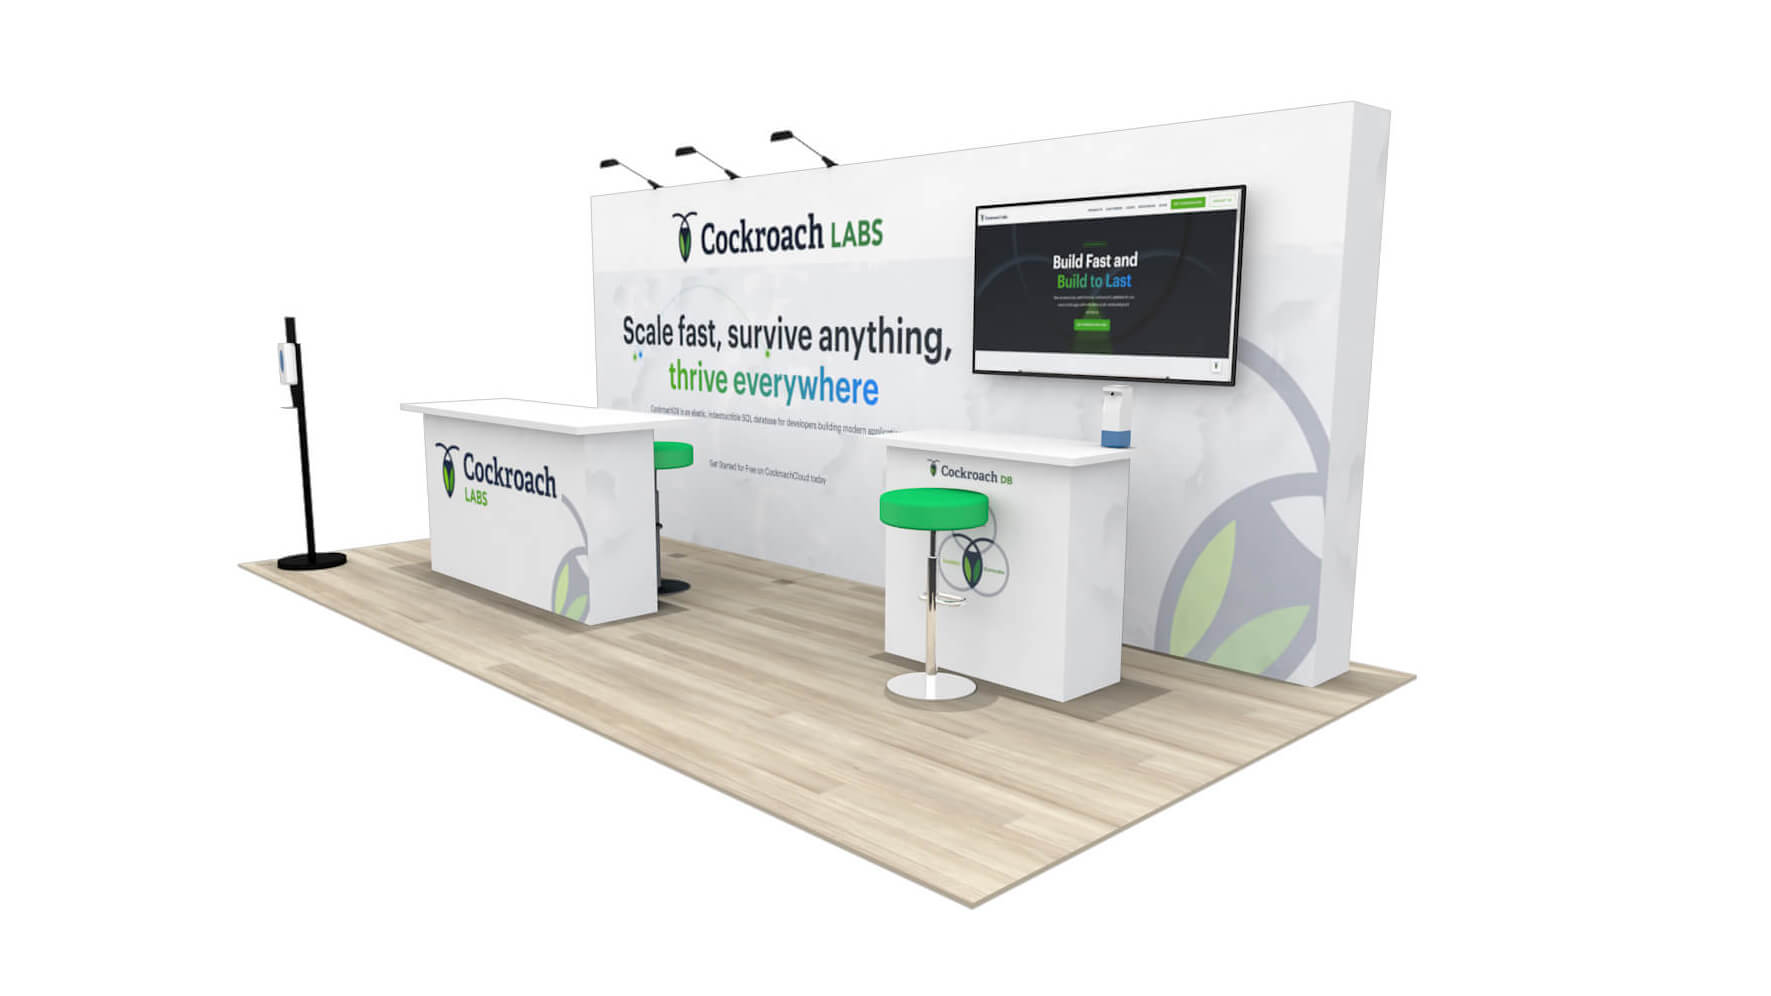 What makes a super great 10 x 20 trade show rental booth?